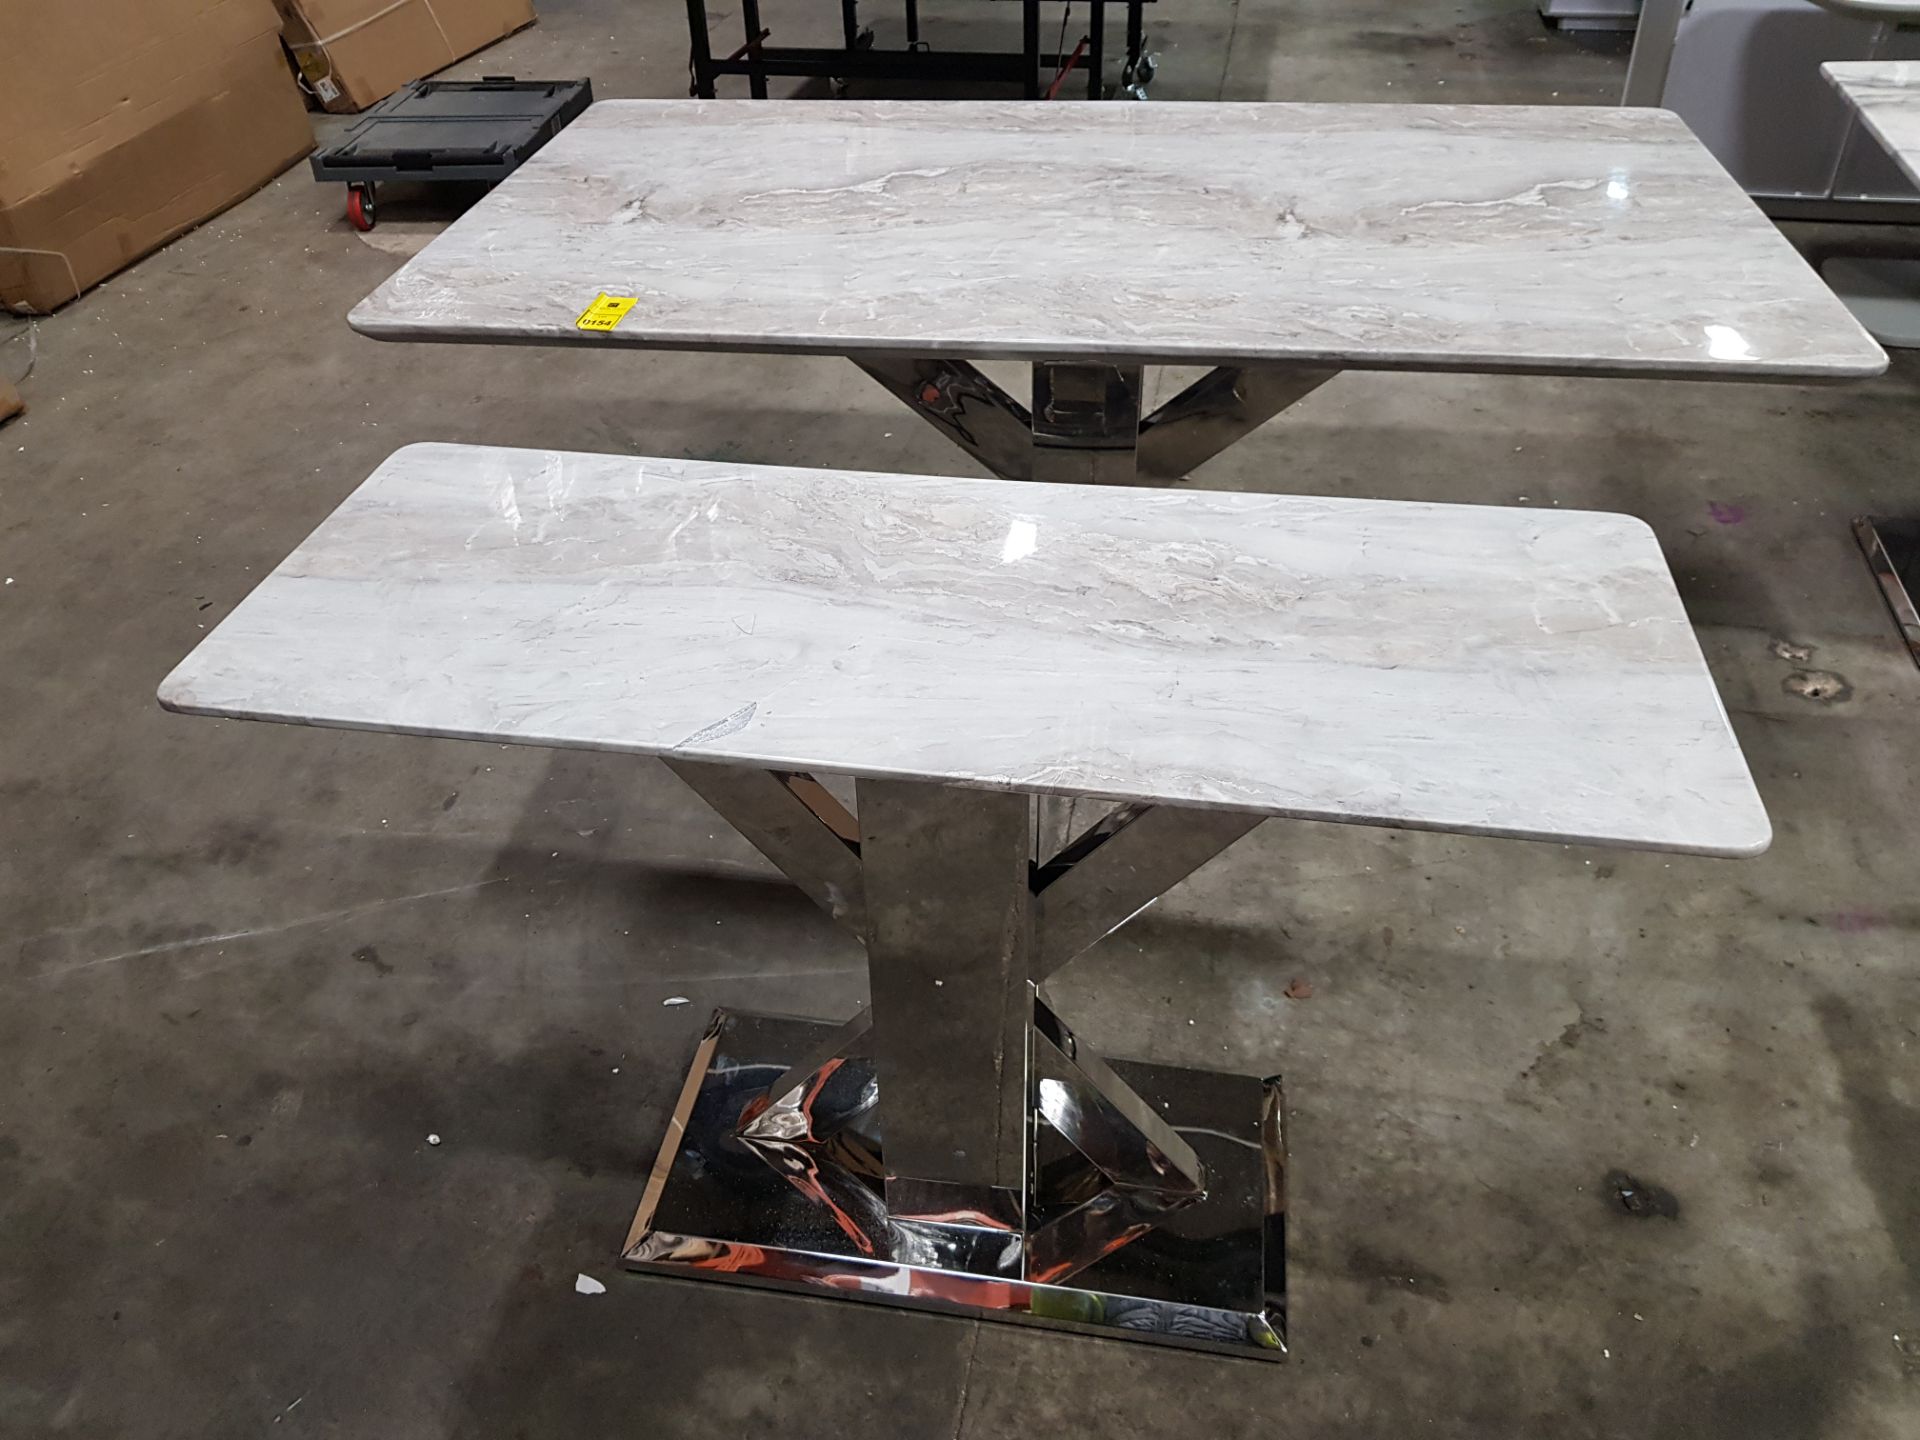 2 PIECE TABLE LOT CONTAINING 1 X VIDA LIVING TREMMEN MILAN GREY MARBLE TOP DINING TABLE WITH